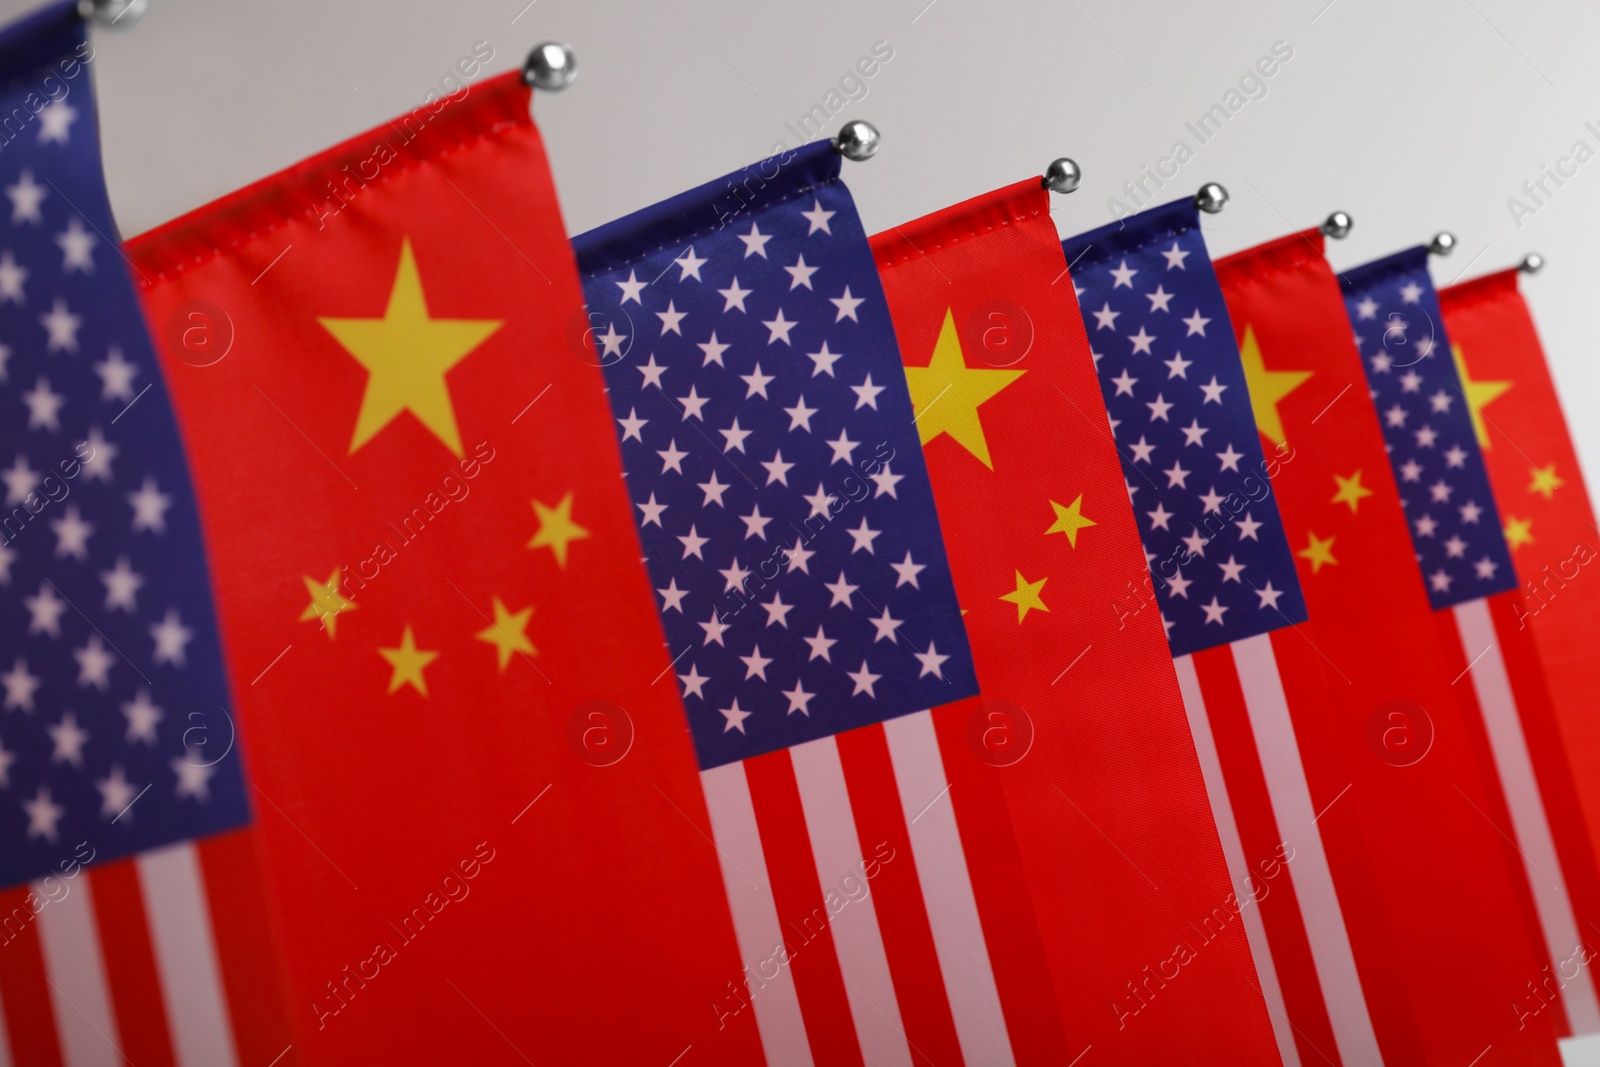 Photo of USA and China flags on light background, closeup. International relations